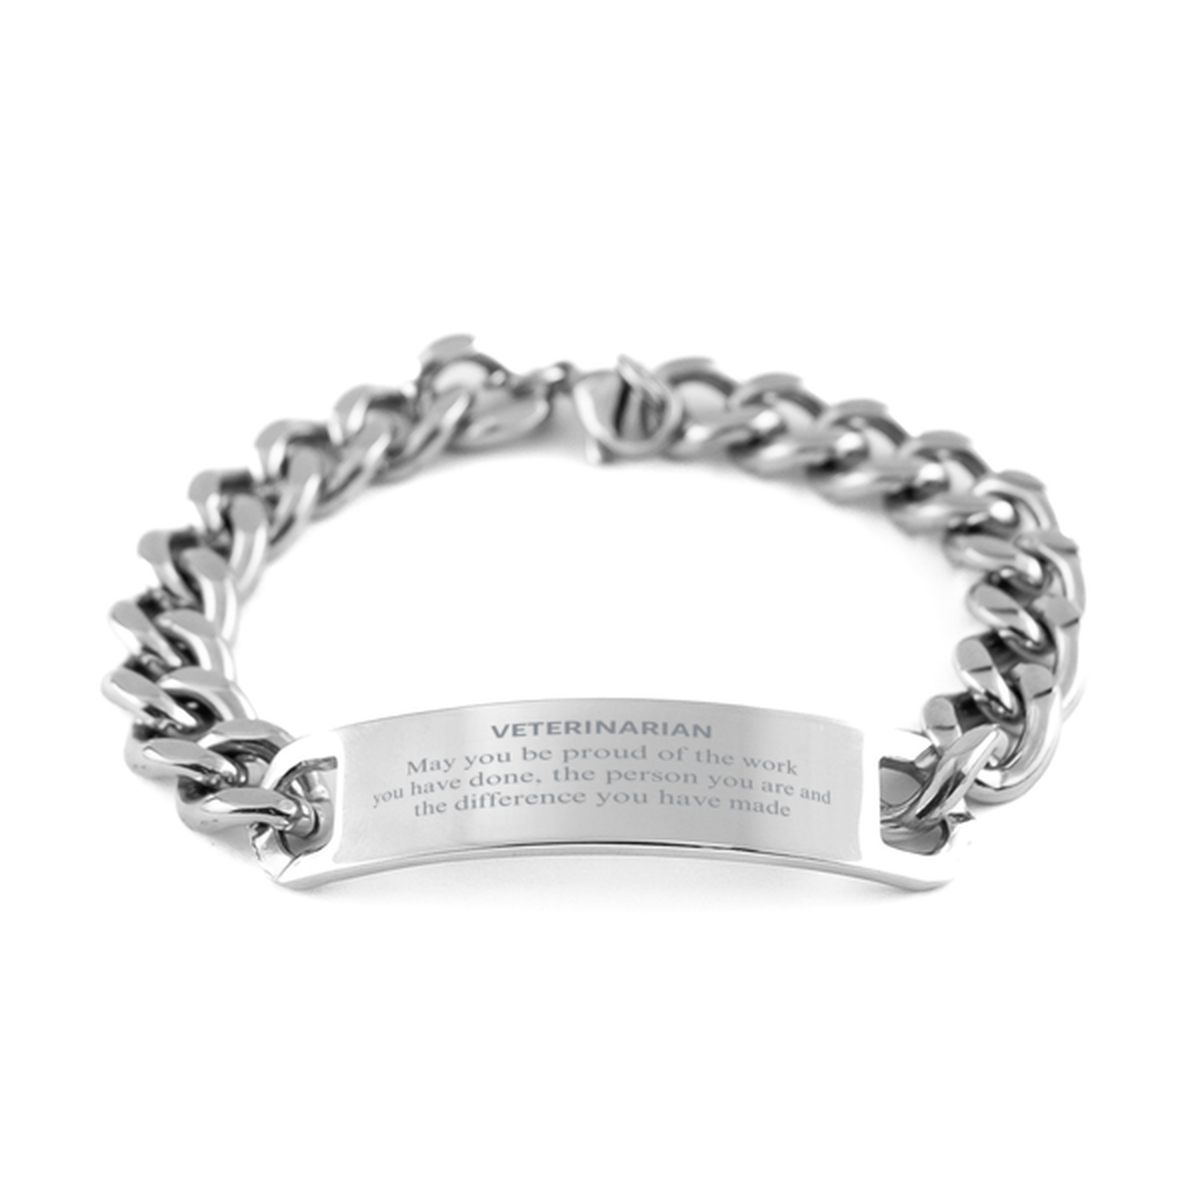 Veterinarian May you be proud of the work you have done, Retirement Veterinarian Cuban Chain Stainless Steel Bracelet for Colleague Appreciation Gifts Amazing for Veterinarian